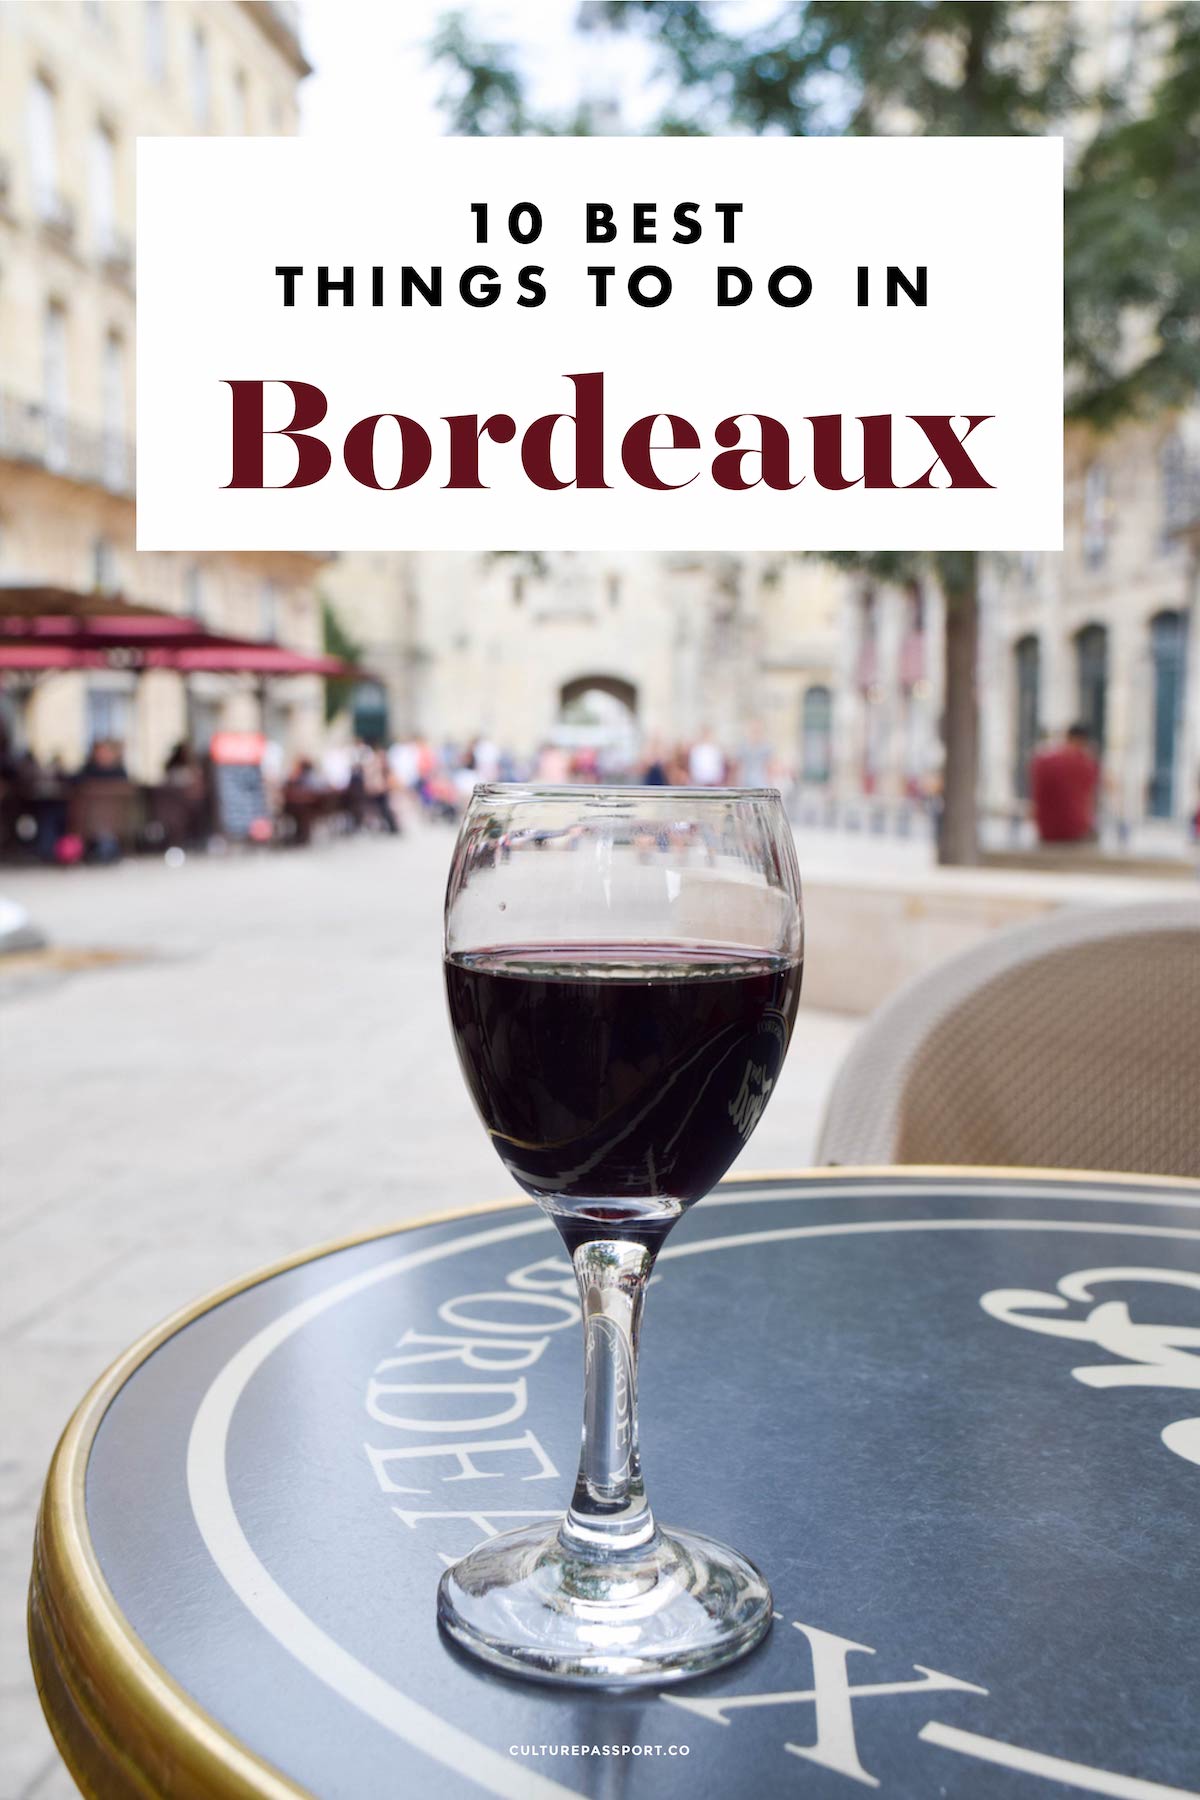 10 Best Things to Do in Bordeaux, France!